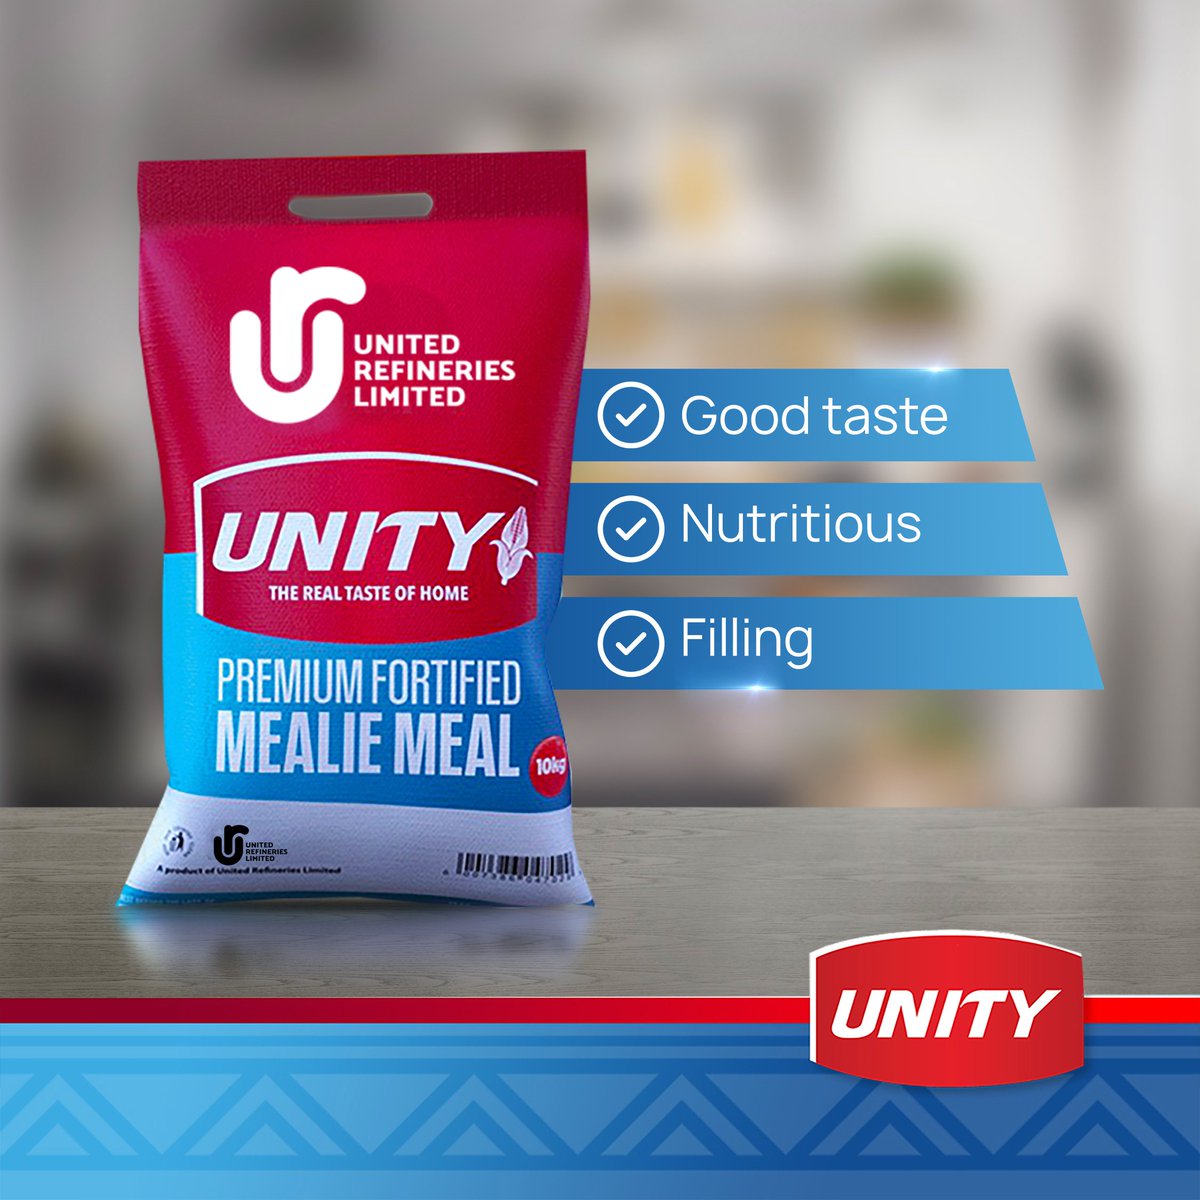 Fuel your day with tasty Unity Mealie Meal! Packed with essential nutrients, it keeps you feeling full and satisfied. #unitymealiemeal